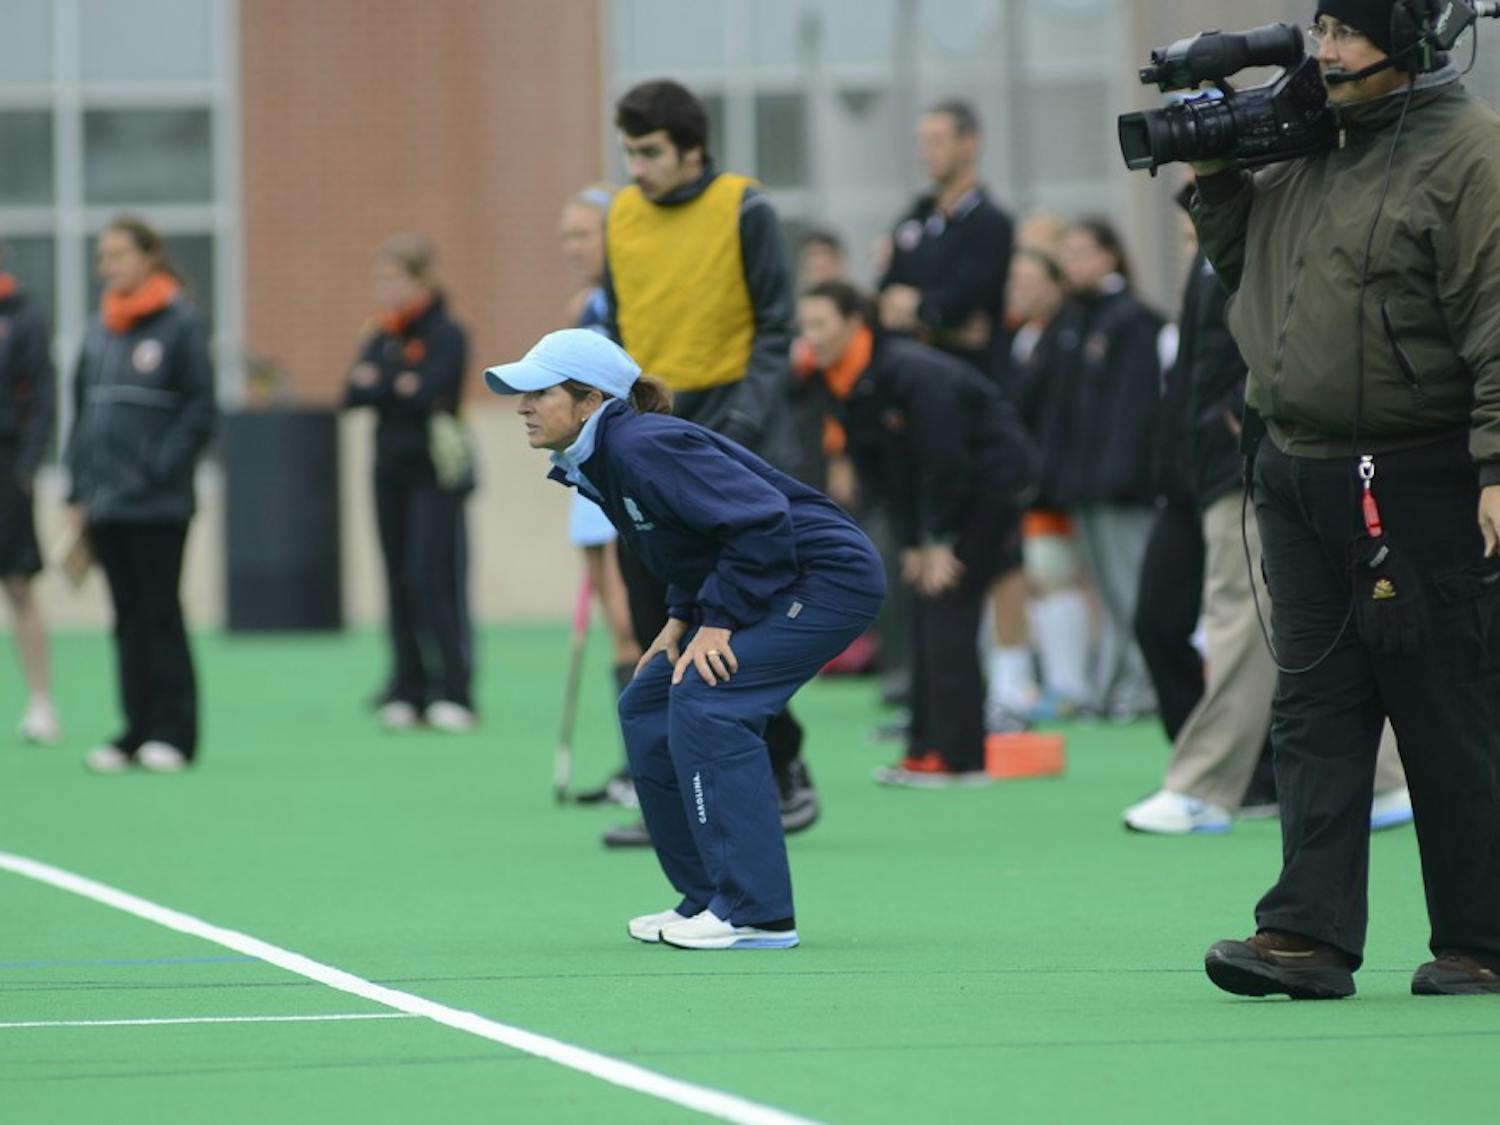 North Carolina field hockey coach Karen Shelton became the head coach of the Tar Heels while she was still a player in 1981. Five years later in 1986, she led the team to its first Final Four.